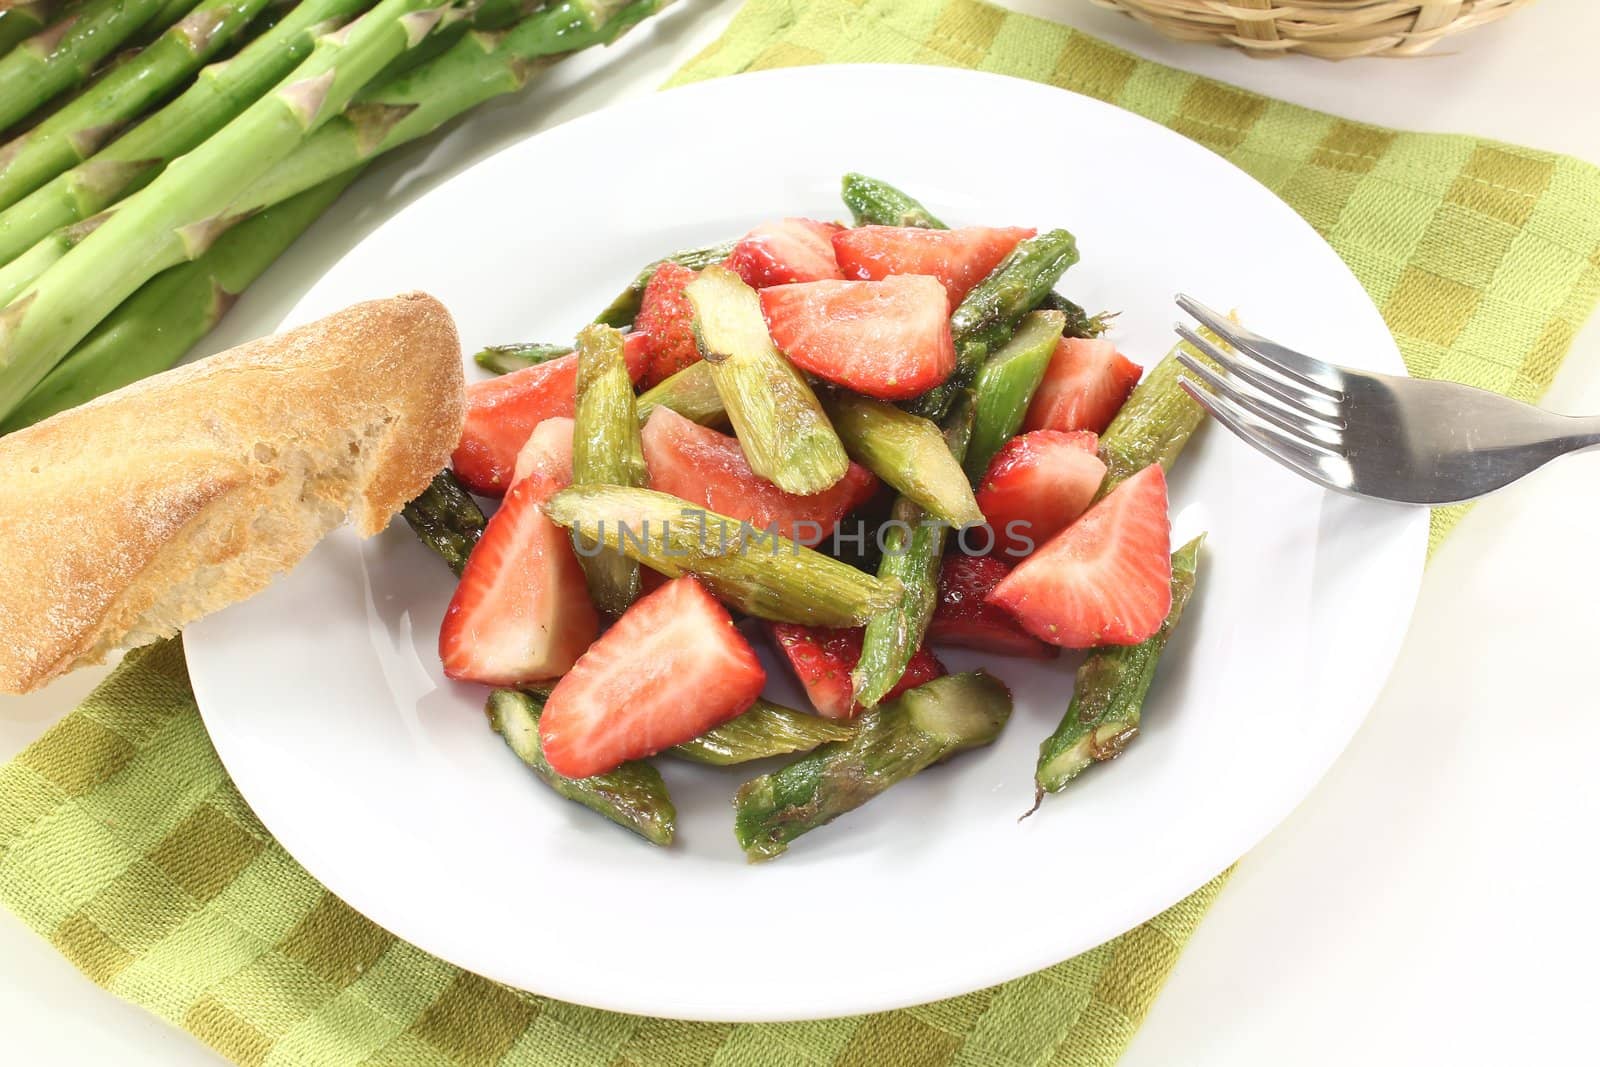 Asparagus salad with strawberries by discovery